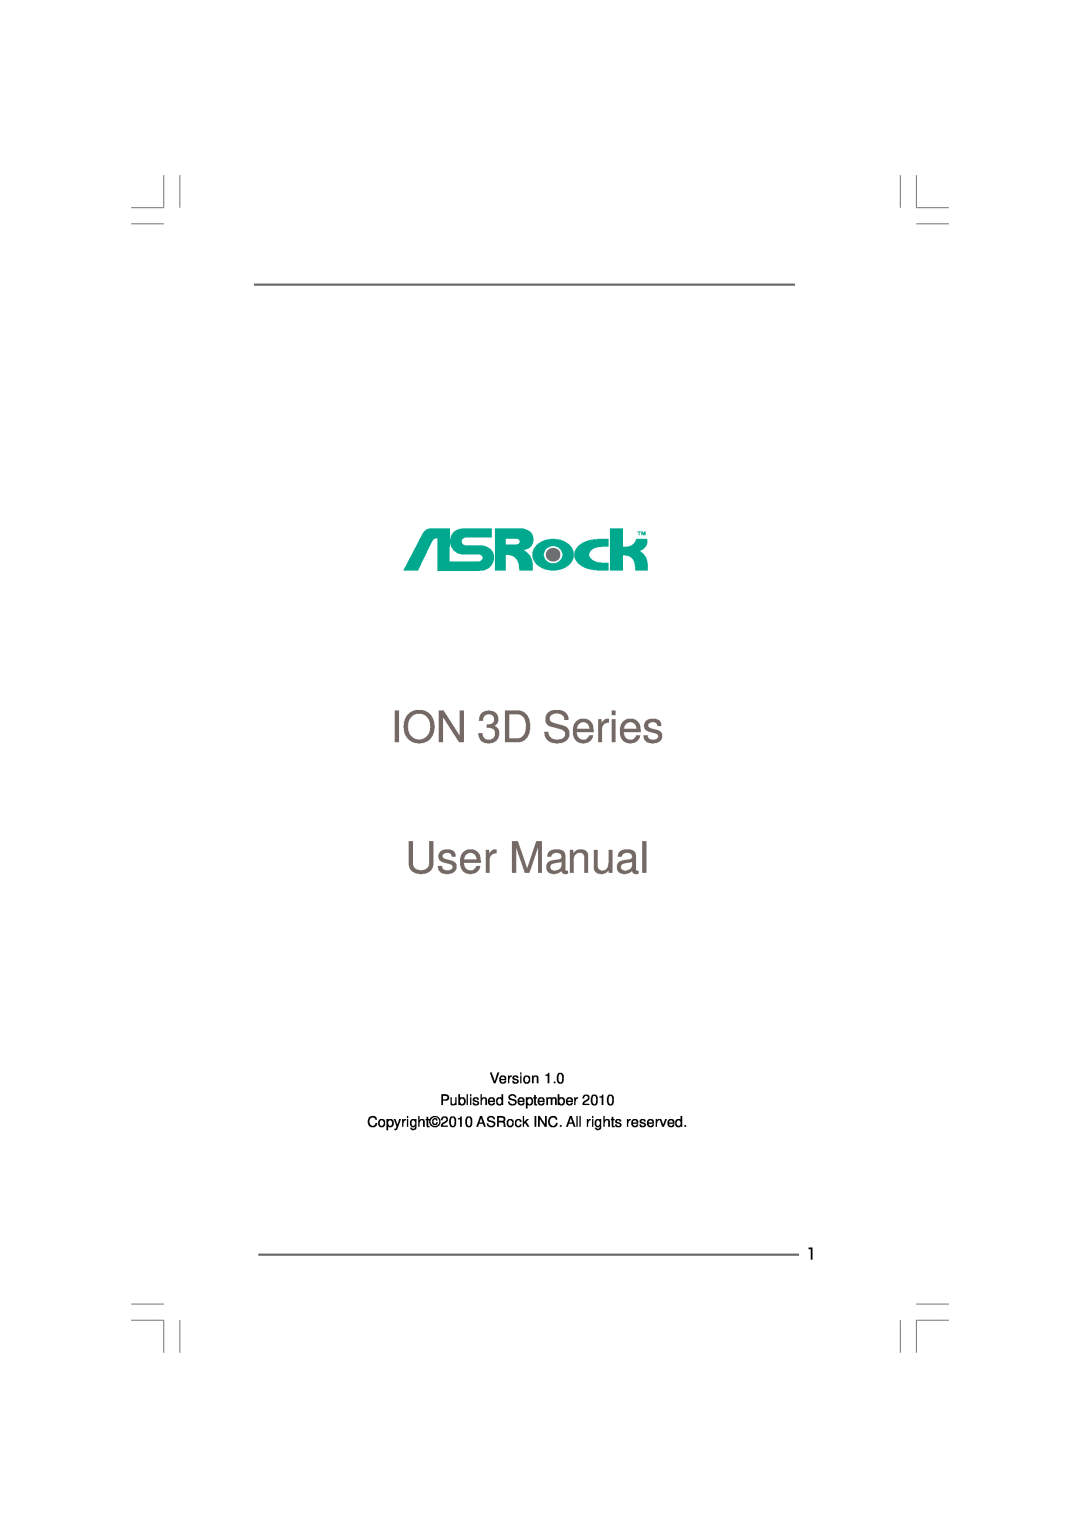 ASRock manual ION 3D Series User Manual, Version Published September, Copyright2010 ASRock INC. All rights reserved 